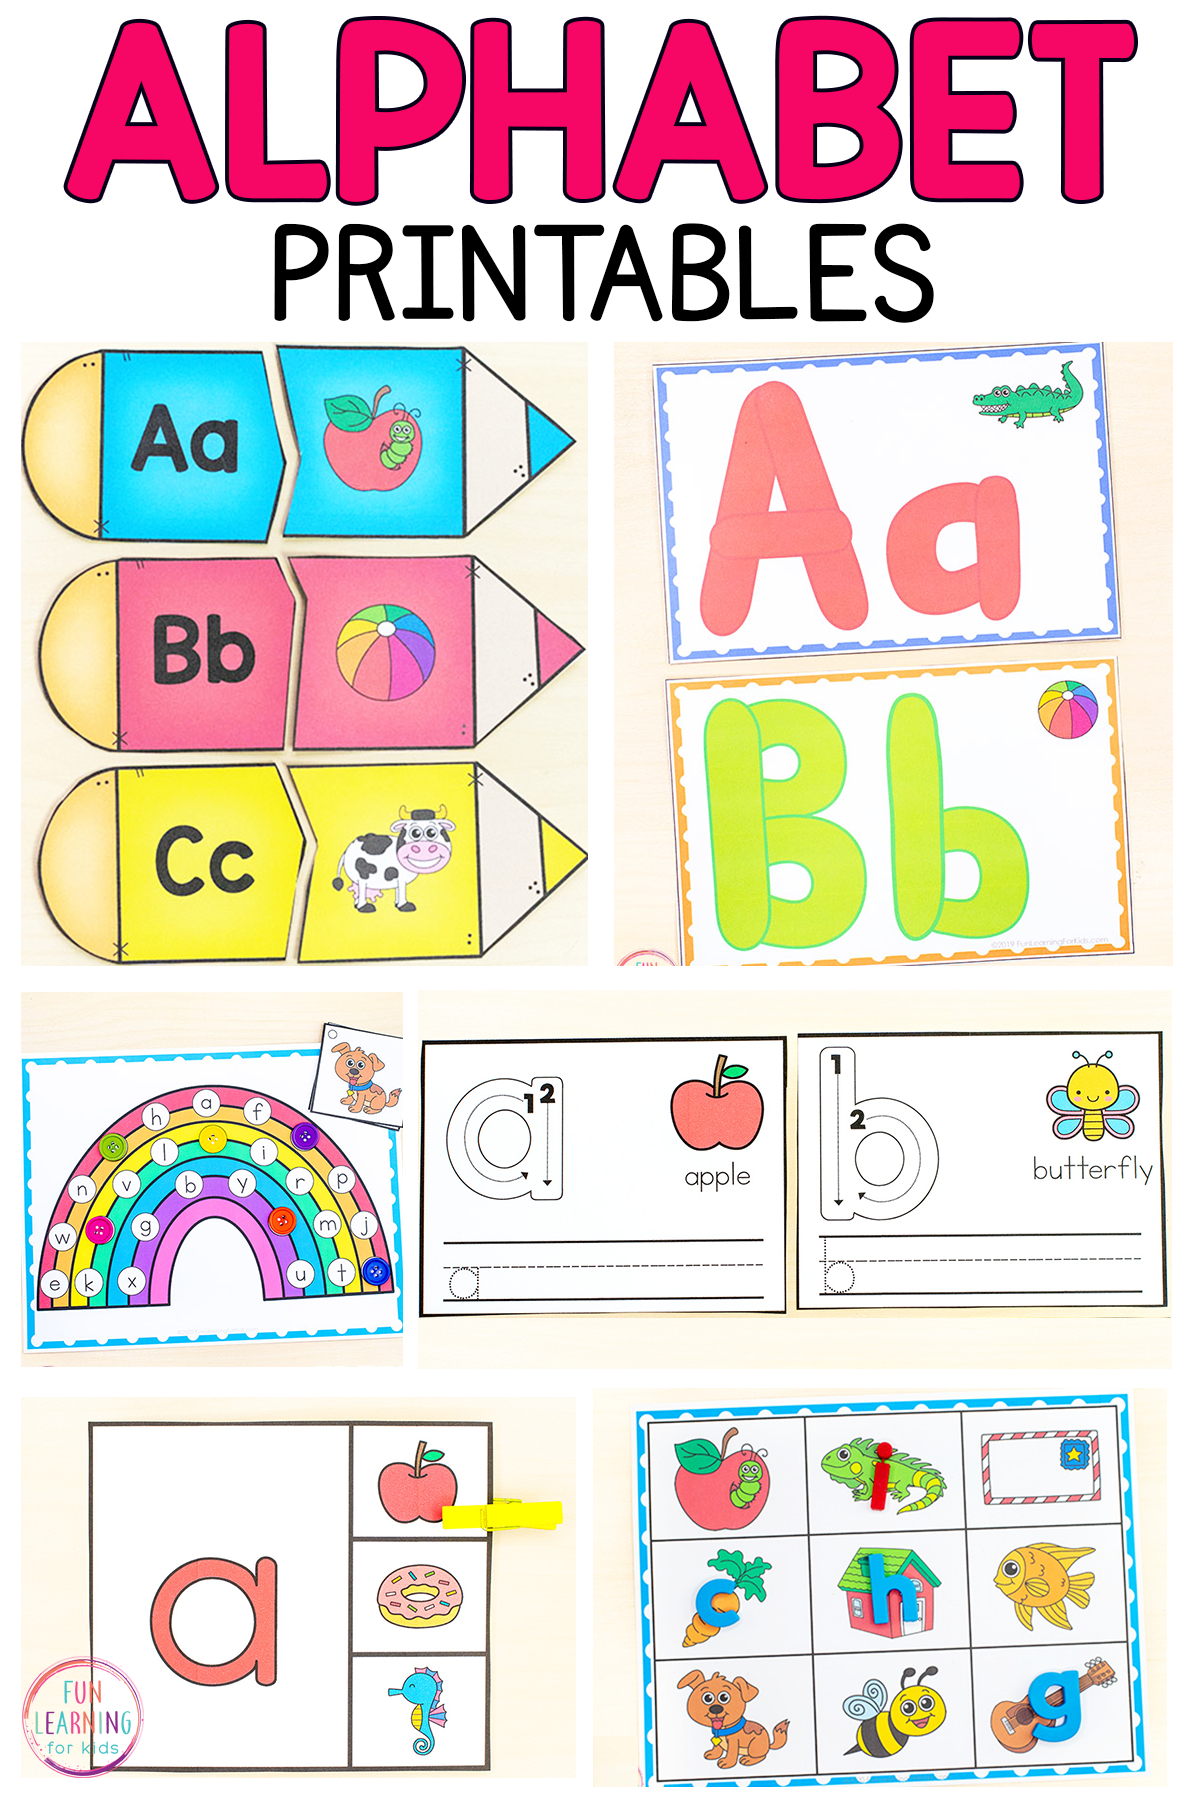 Free Alphabet Printables - Free Printable Alphabet Games And Activities